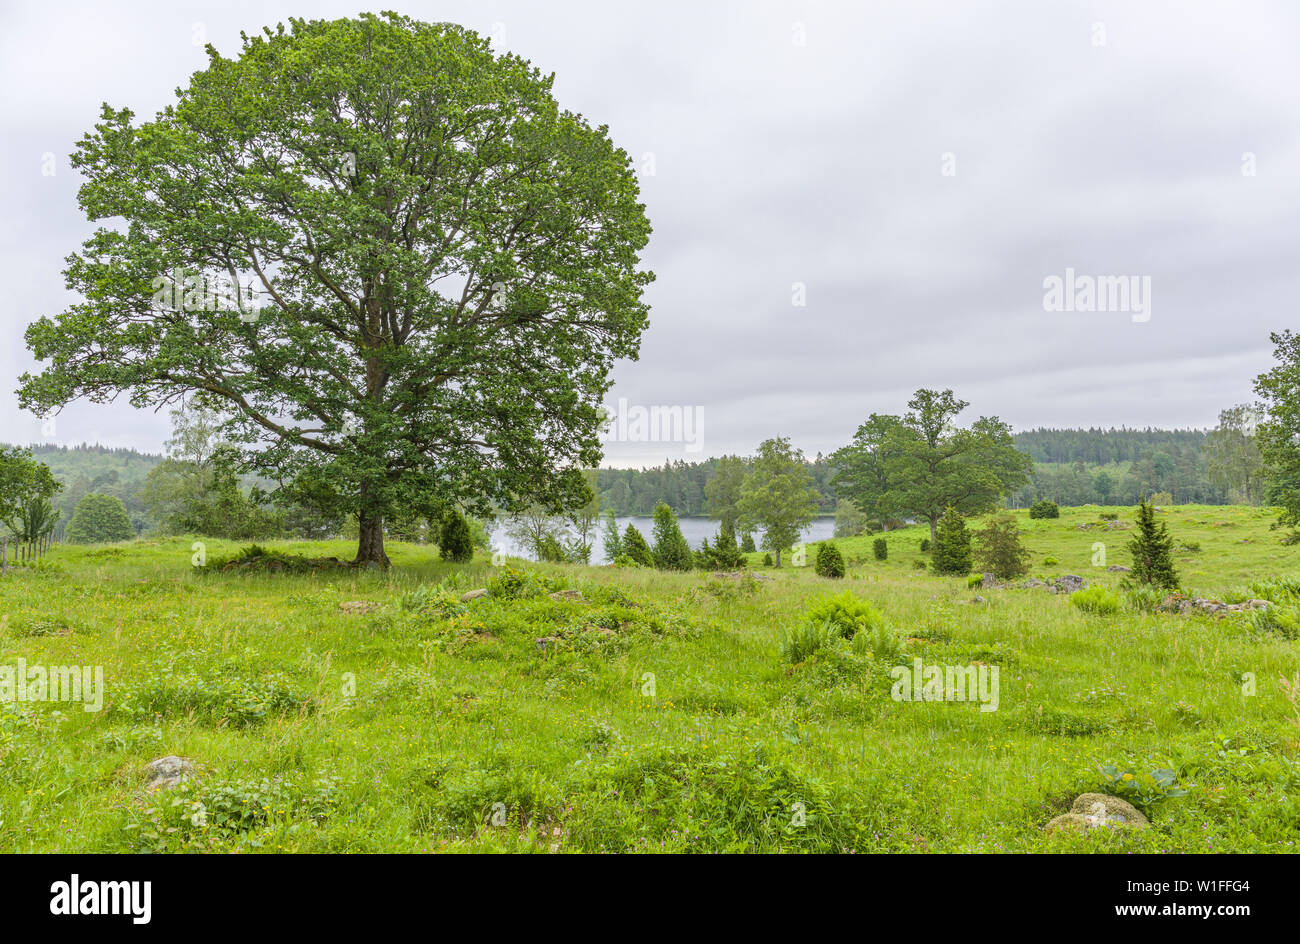 Typical Swedish or Scandinavian countryside summer landscape view with beautiful fresh green meadow field overlooking small lake surrounded by forest Stock Photo